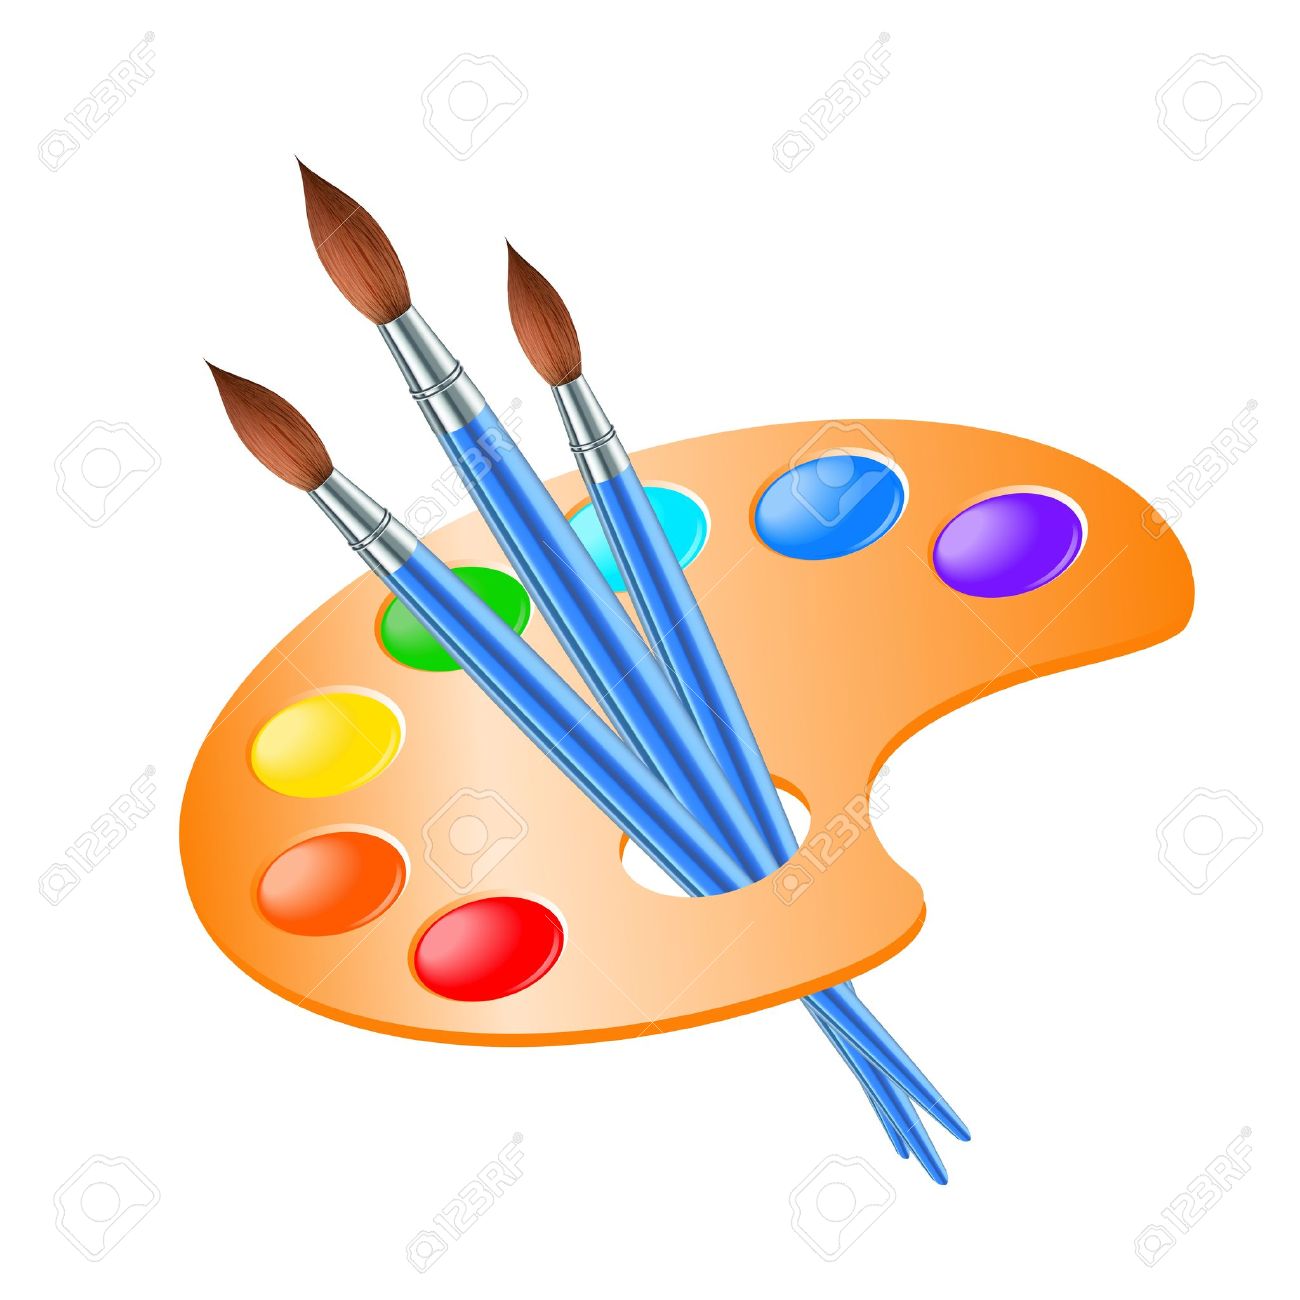 Art palette with paint brush for drawing Vector illustration.